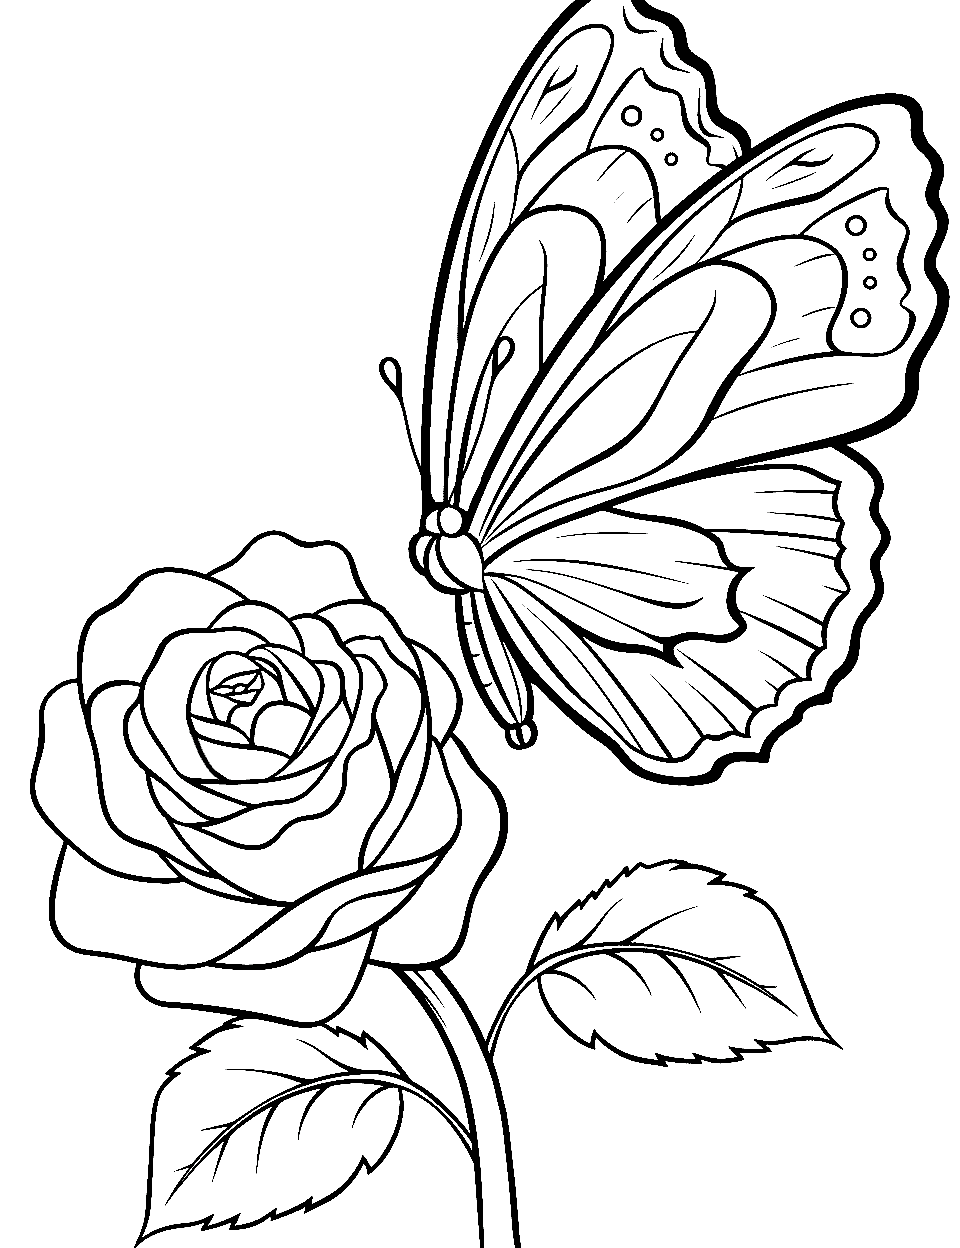 25 Rose Coloring Pages: Free Printable Sheets